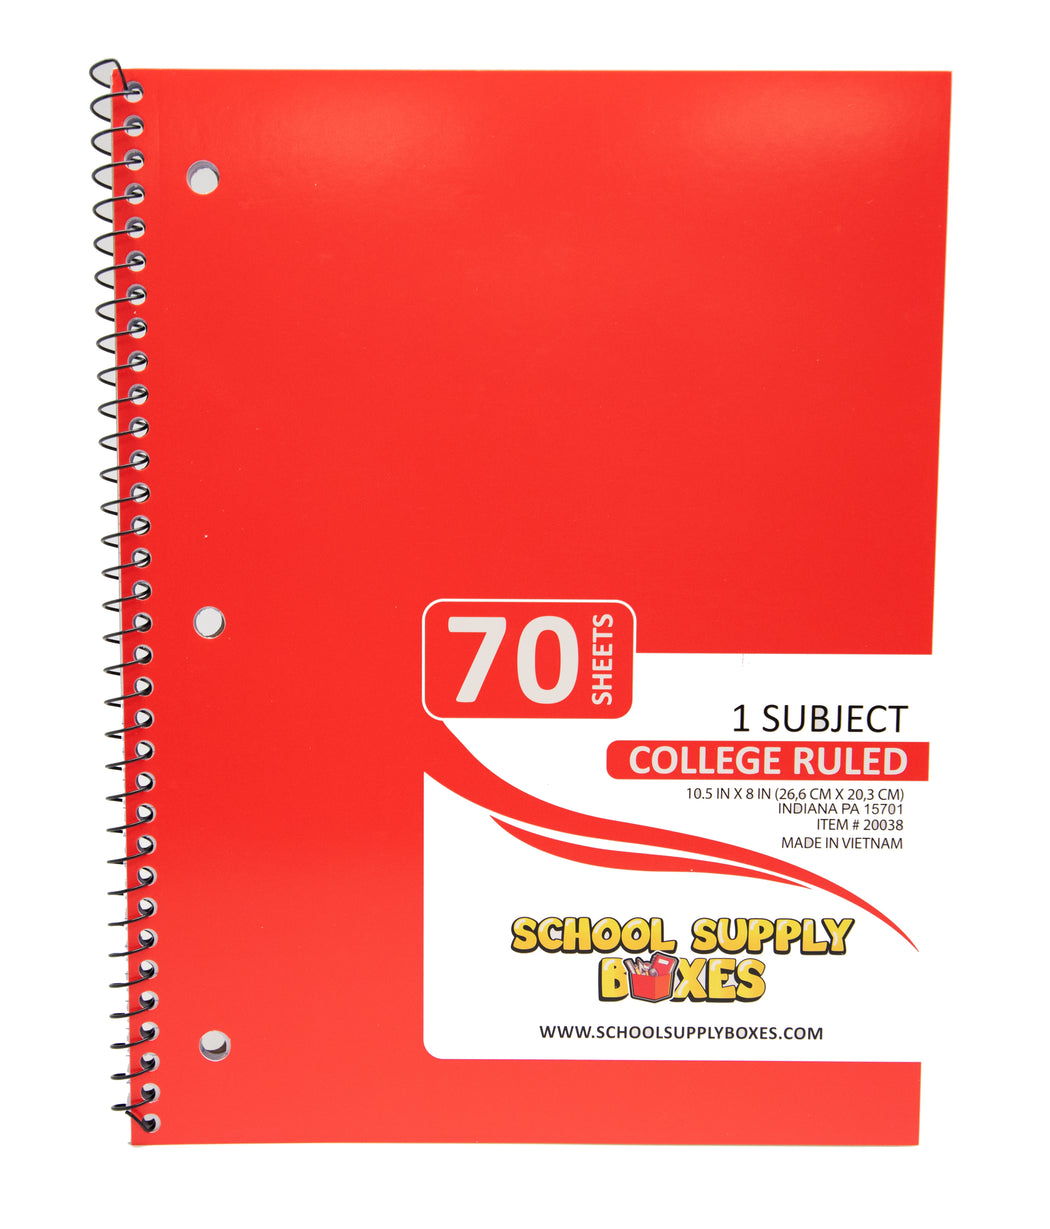 Trail Maker Bulk Notebooks 50 Pack - One Subject Notebooks College Ruled Bulk Notebooks for Kids, School, Journaling, Note Taking, Students, or Work